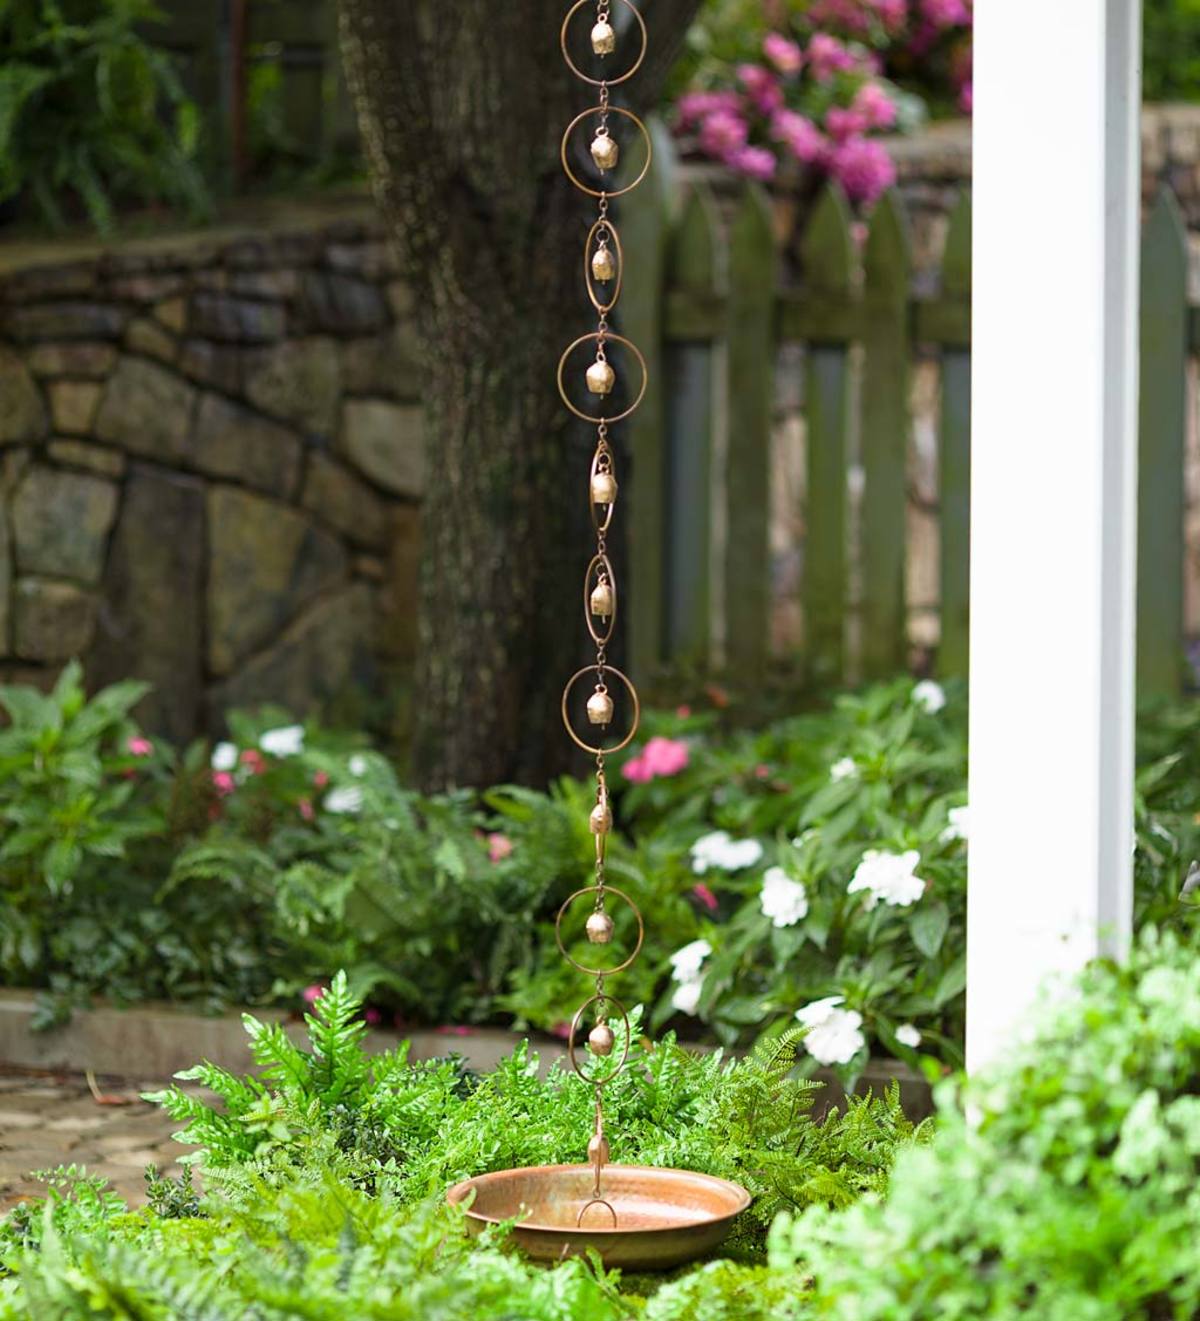 Circle Bell Rain Chain and Receptacle Set